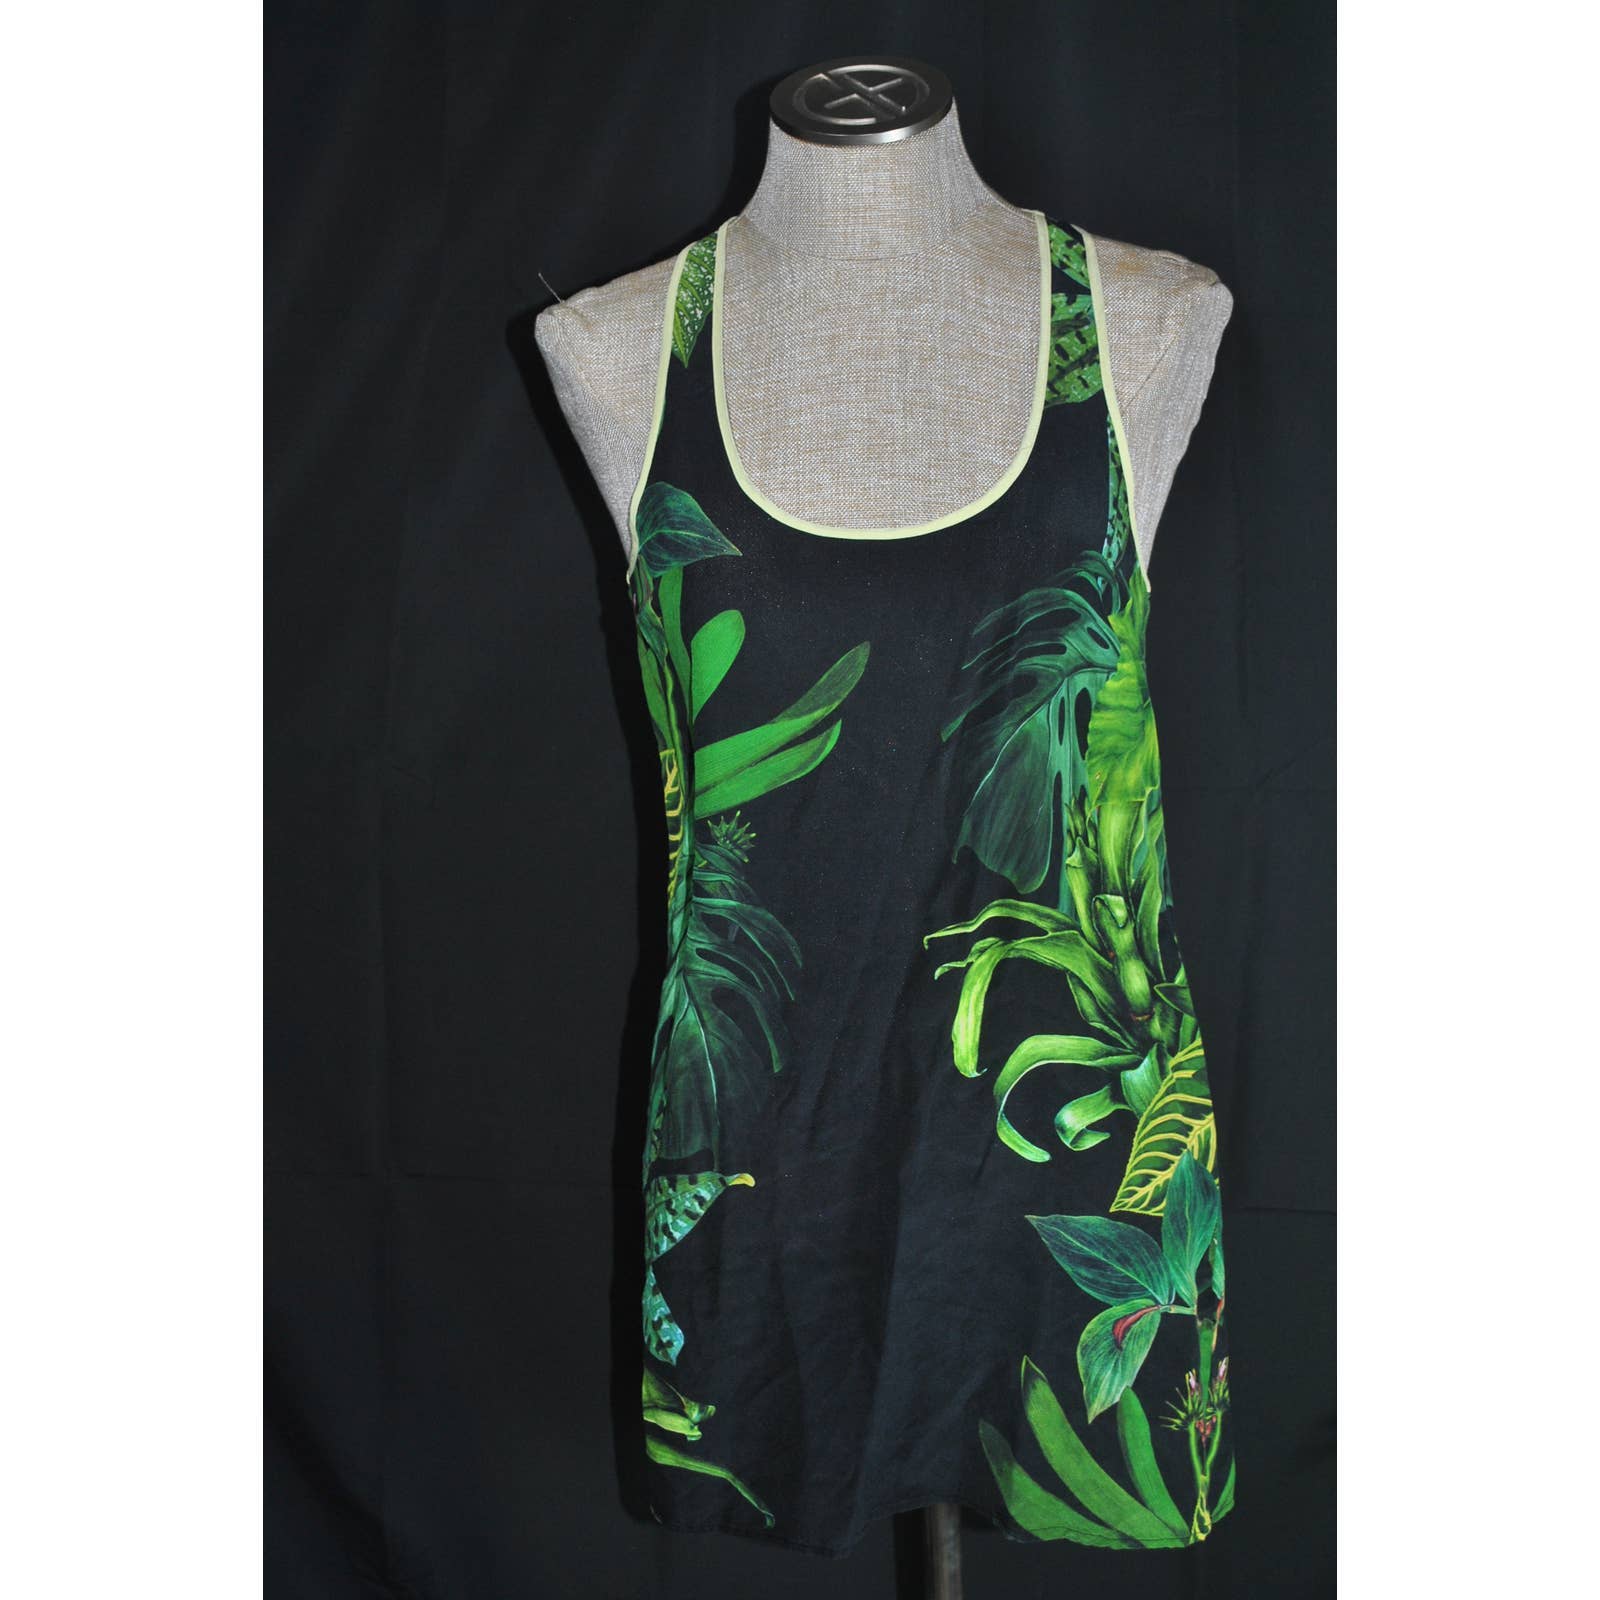 Seafolly Black and Green Floral Sheer Tunic Top  Cover Up - S